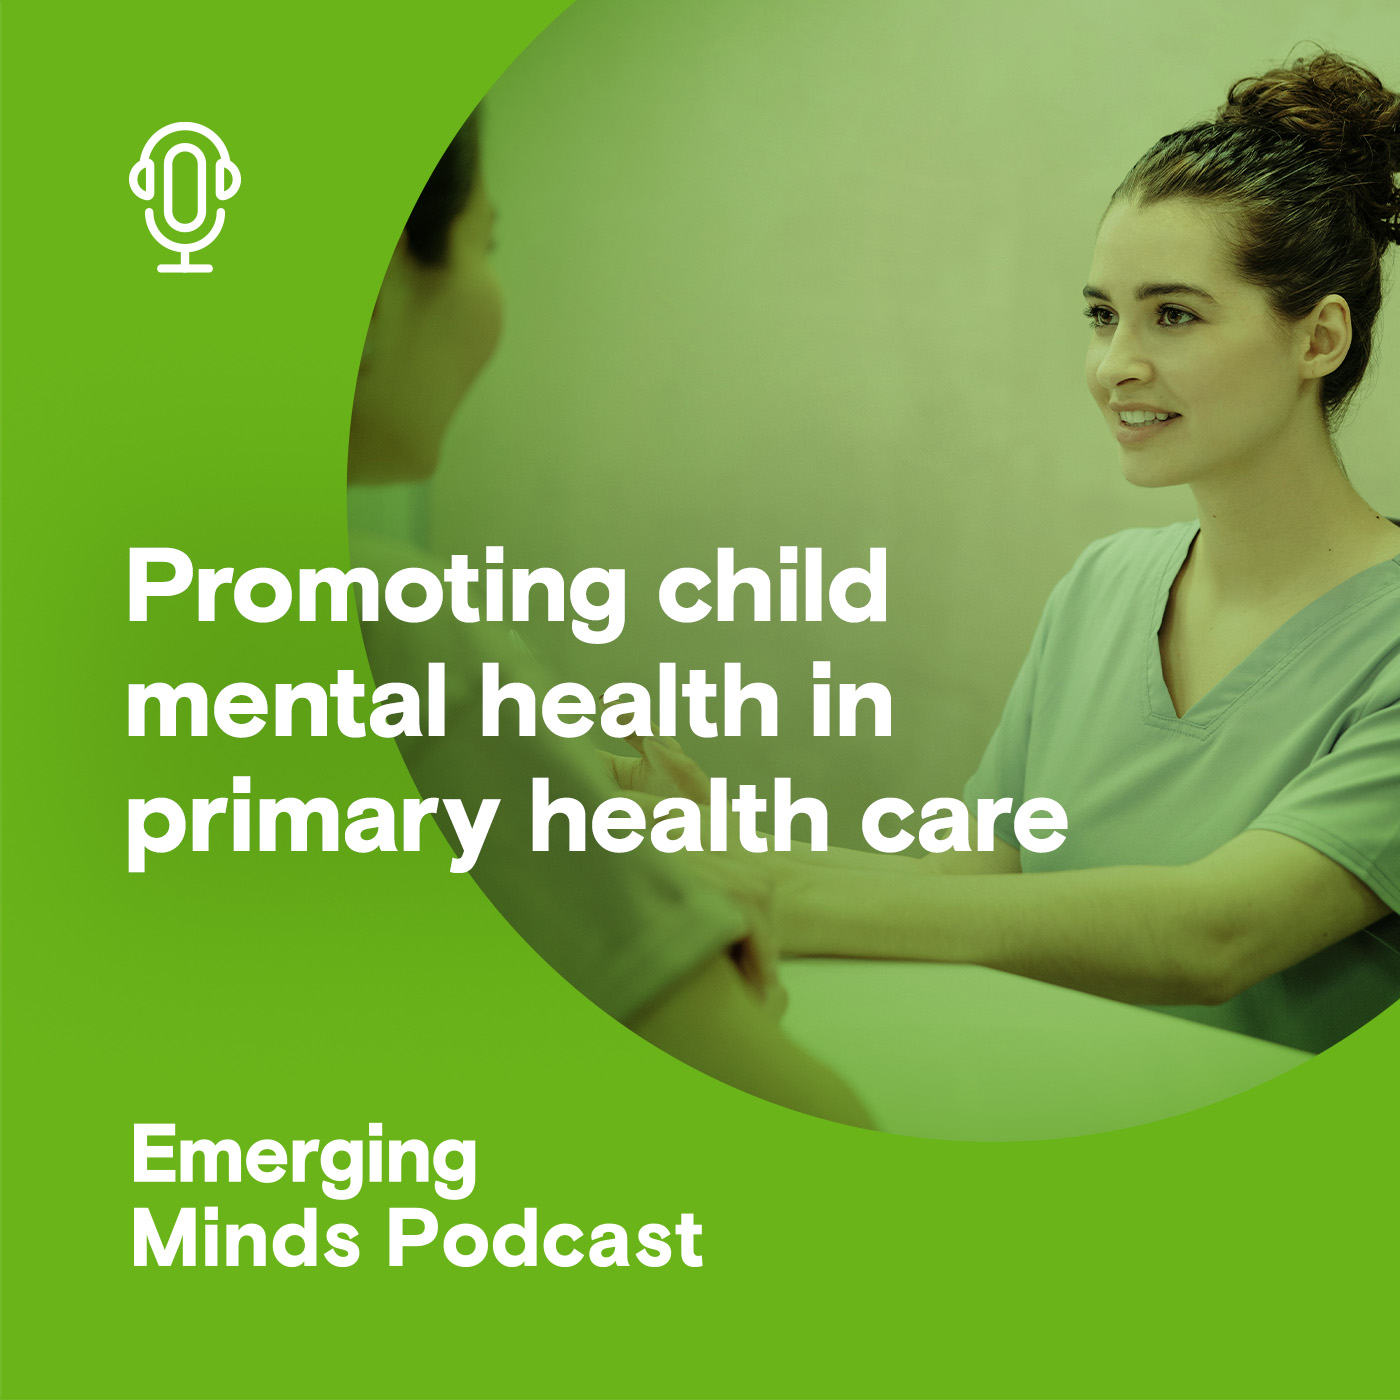 Promoting child mental health in primary health care